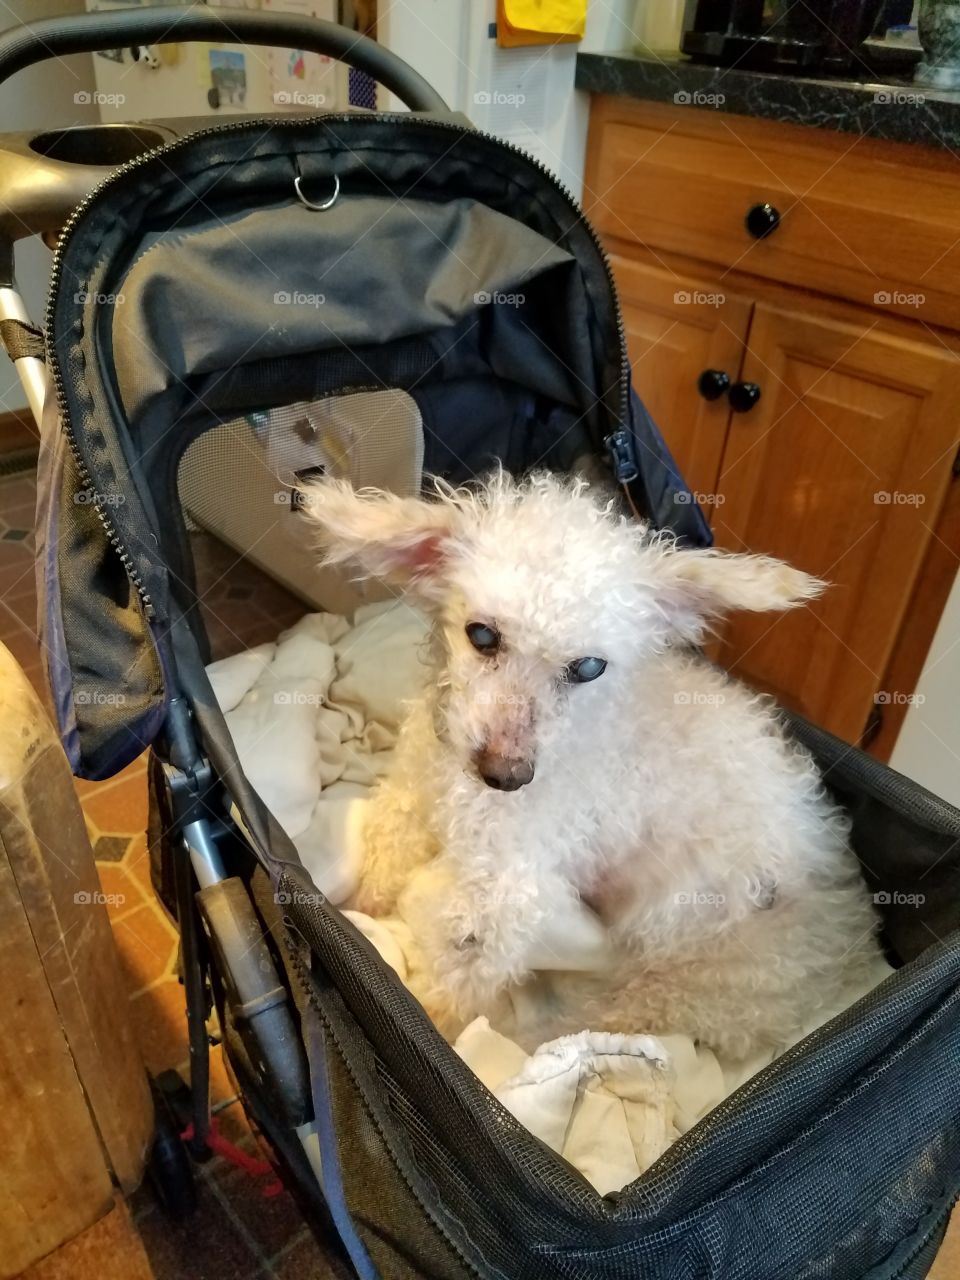 Older dog in pet carriage for safety.